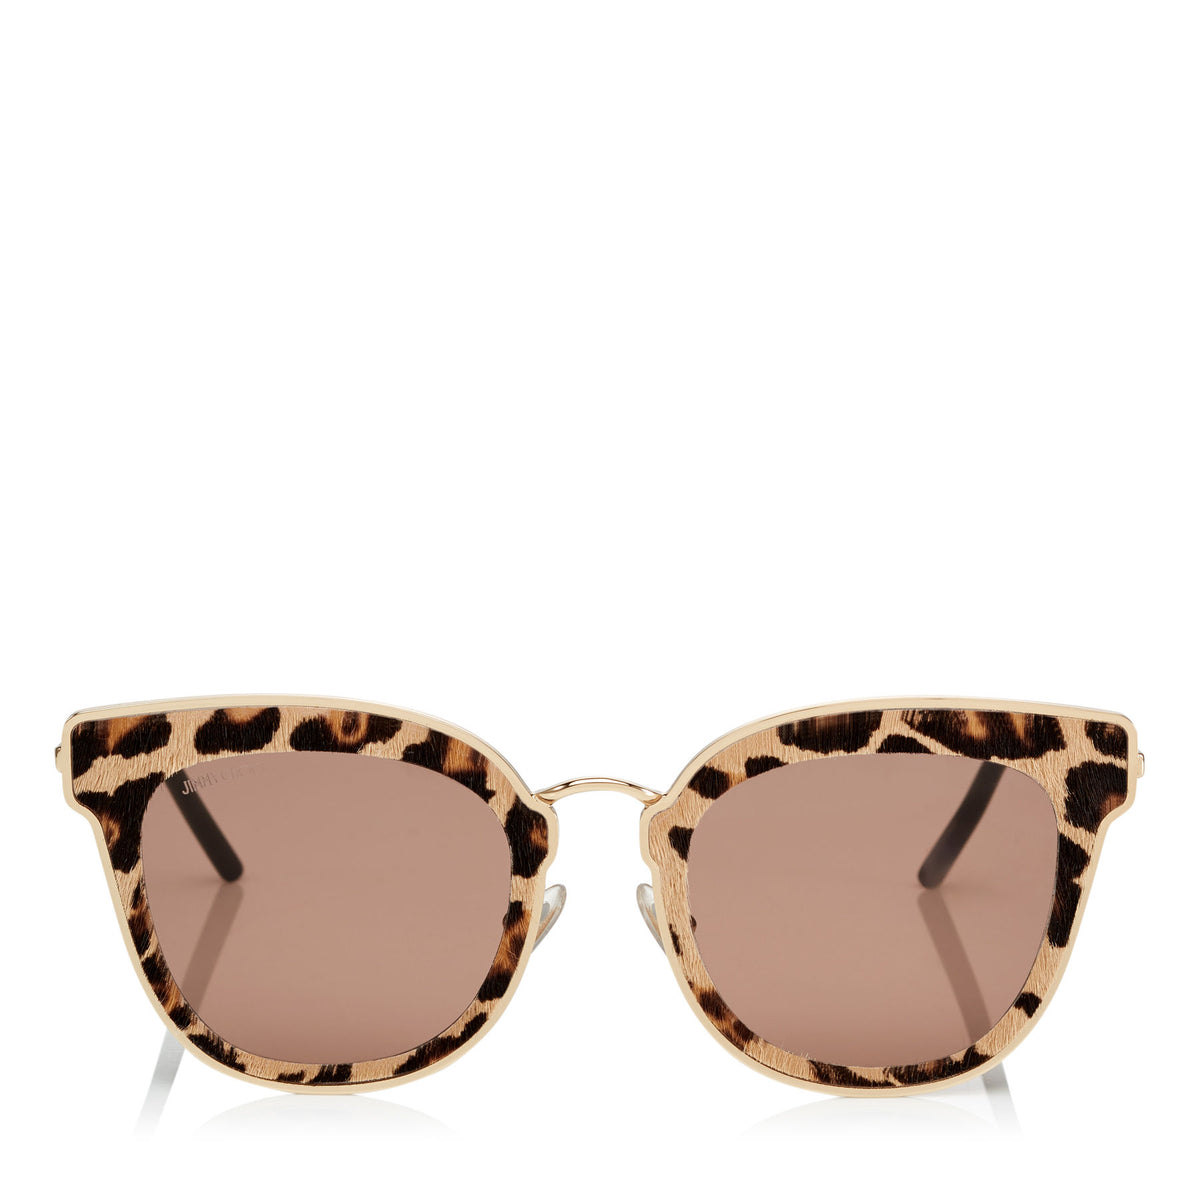 JIMMY CHOO Nile Rose Gold Metal Cat-Eye Sunglasses with Leopard Cavallino Leather Detailing ITEM NO. NILES63EXMG